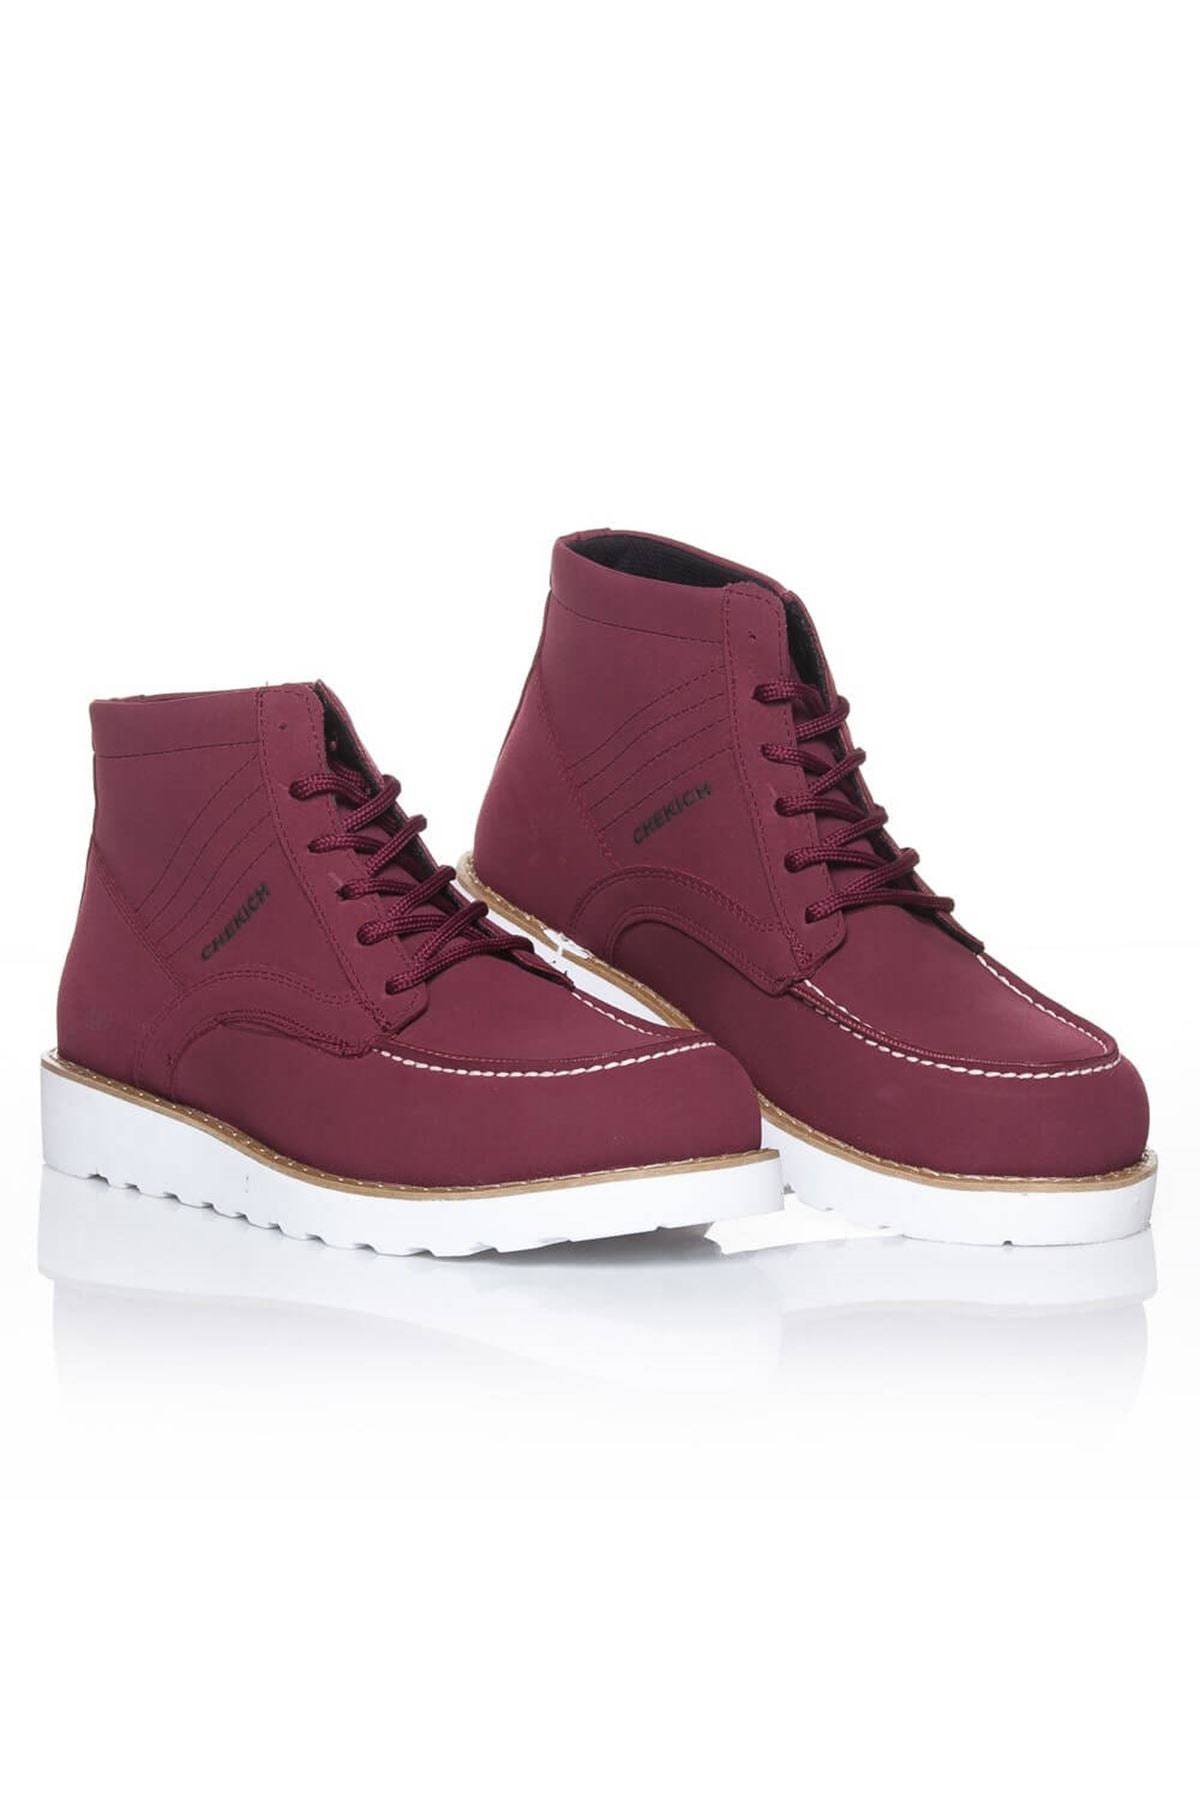 CH047 Men's Burgundy-White Sole Lace-Up Sneaker Sports Boots - STREETMODE ™